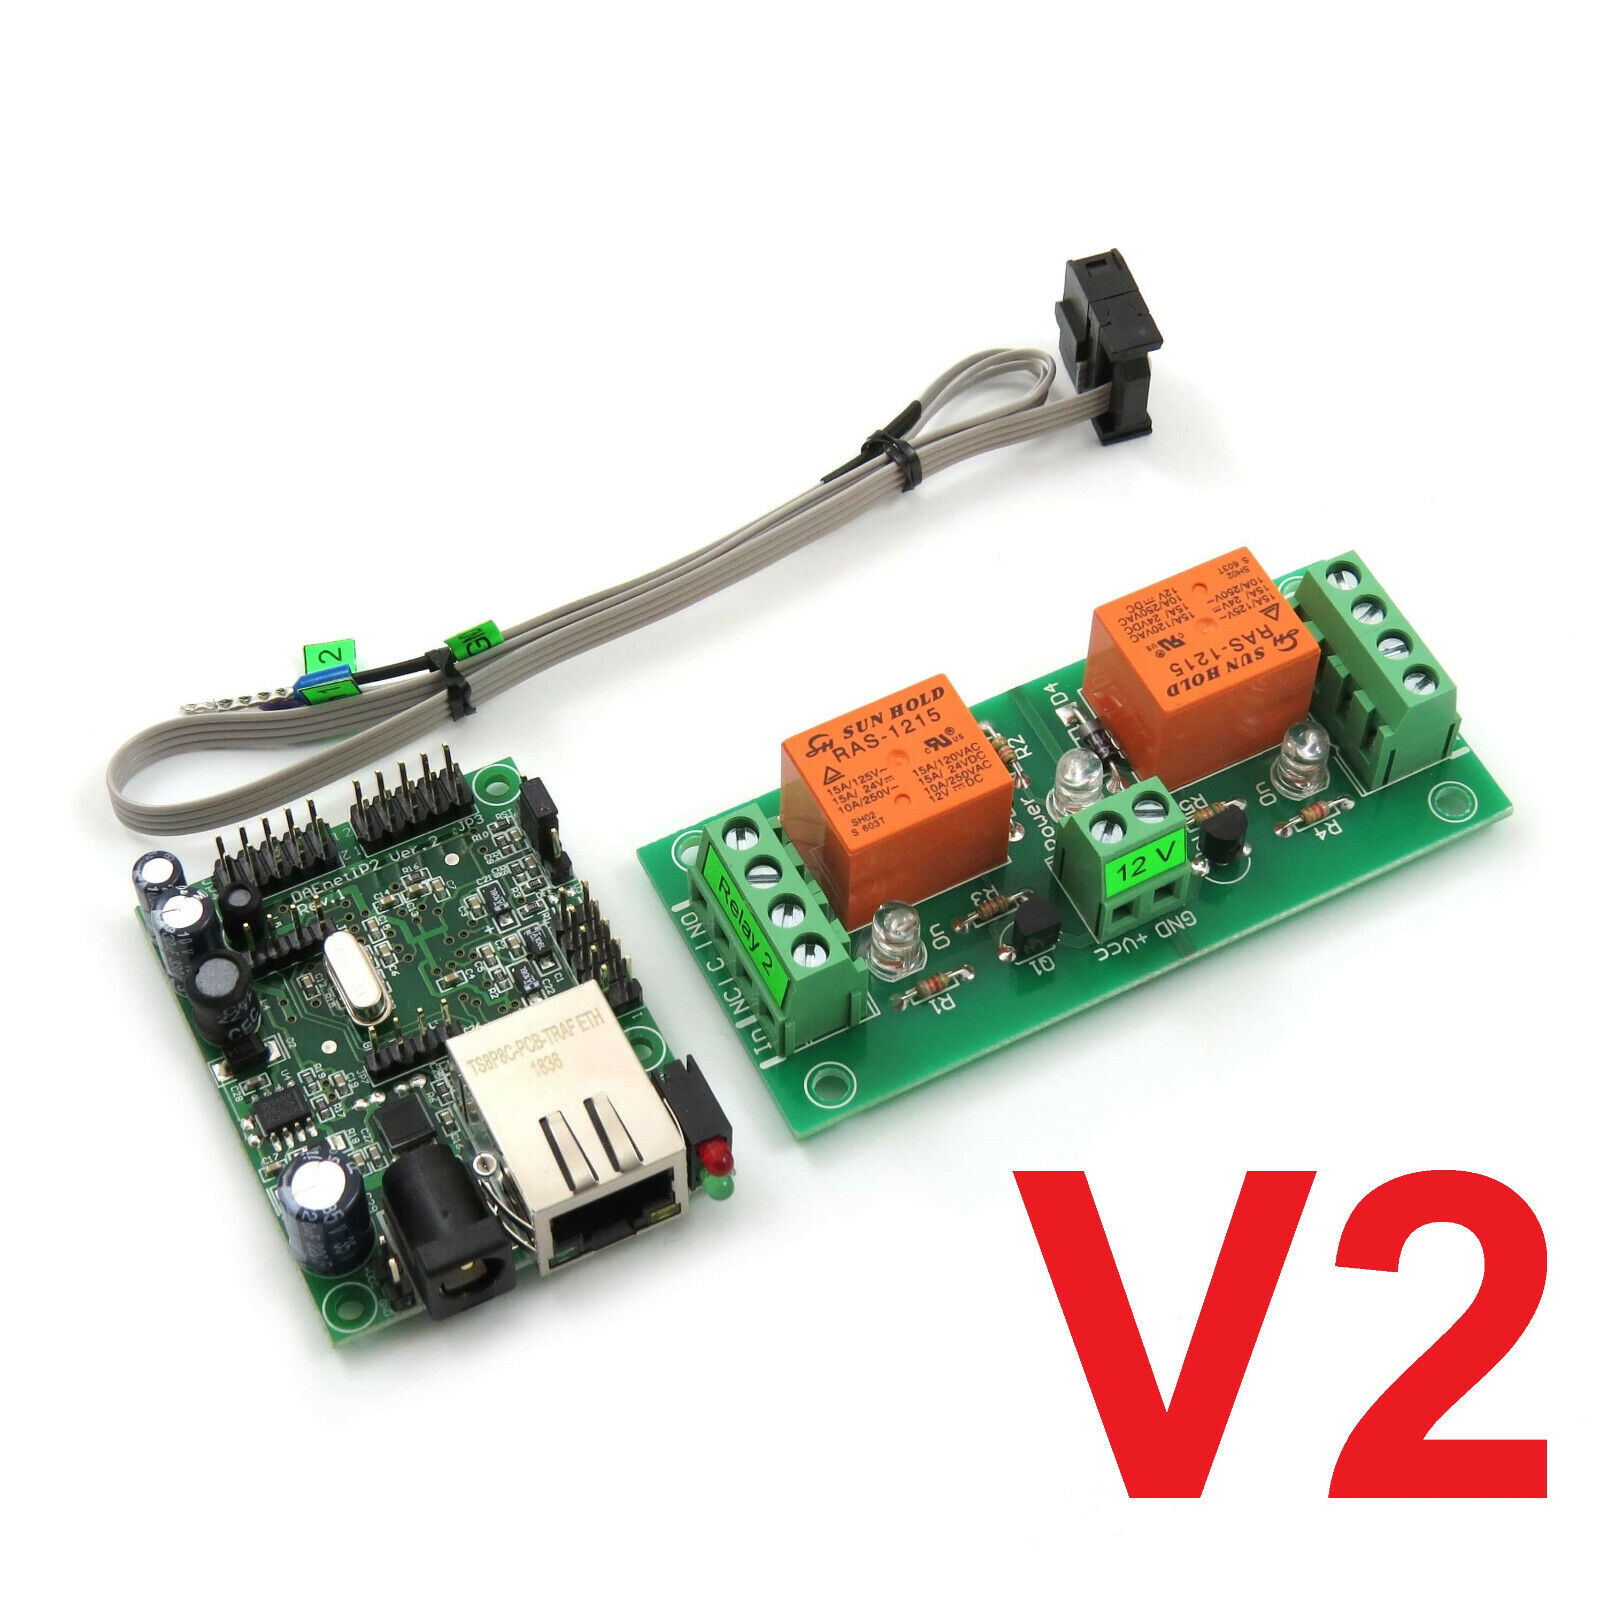 DAEnetIP2v2 Ethernet 2 CH Relay Board for Home Automation - SNMP, Web, IP, LAN